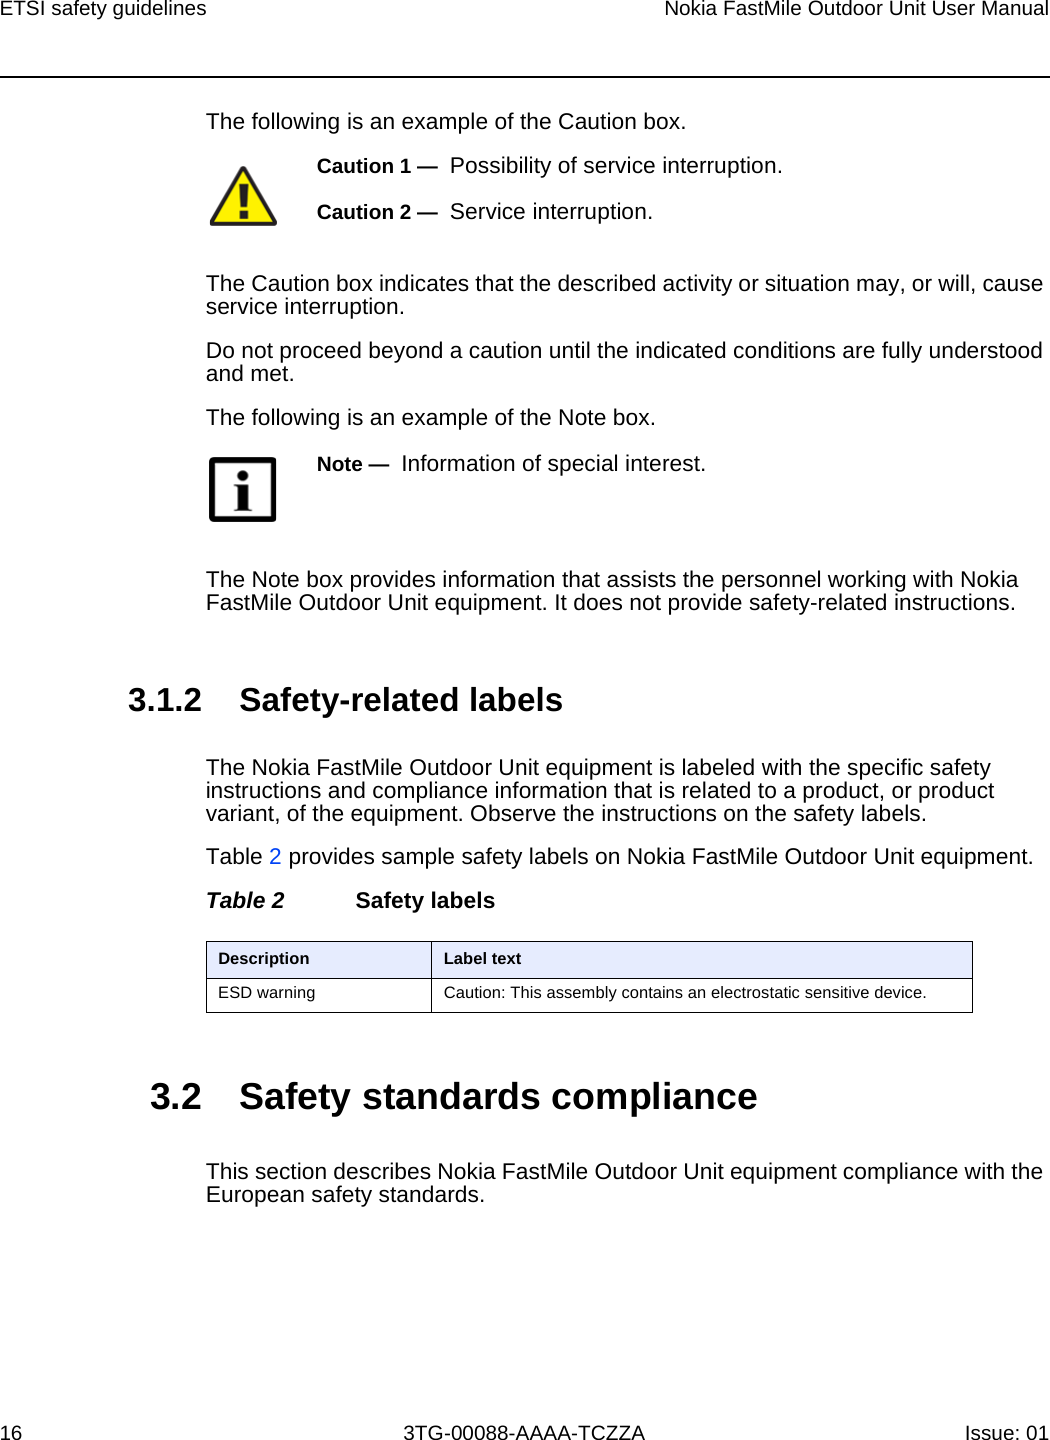 ETSI safety guidelines16Nokia FastMile Outdoor Unit User Manual3TG-00088-AAAA-TCZZA Issue: 01 The following is an example of the Caution box.The Caution box indicates that the described activity or situation may, or will, cause service interruption.Do not proceed beyond a caution until the indicated conditions are fully understood and met.The following is an example of the Note box.The Note box provides information that assists the personnel working with Nokia FastMile Outdoor Unit equipment. It does not provide safety-related instructions.3.1.2 Safety-related labelsThe Nokia FastMile Outdoor Unit equipment is labeled with the specific safety instructions and compliance information that is related to a product, or product variant, of the equipment. Observe the instructions on the safety labels.Table 2 provides sample safety labels on Nokia FastMile Outdoor Unit equipment.Table 2 Safety labels3.2 Safety standards complianceThis section describes Nokia FastMile Outdoor Unit equipment compliance with the European safety standards.Caution 1 —  Possibility of service interruption.Caution 2 —  Service interruption.Note —  Information of special interest.Description Label textESD warning Caution: This assembly contains an electrostatic sensitive device.